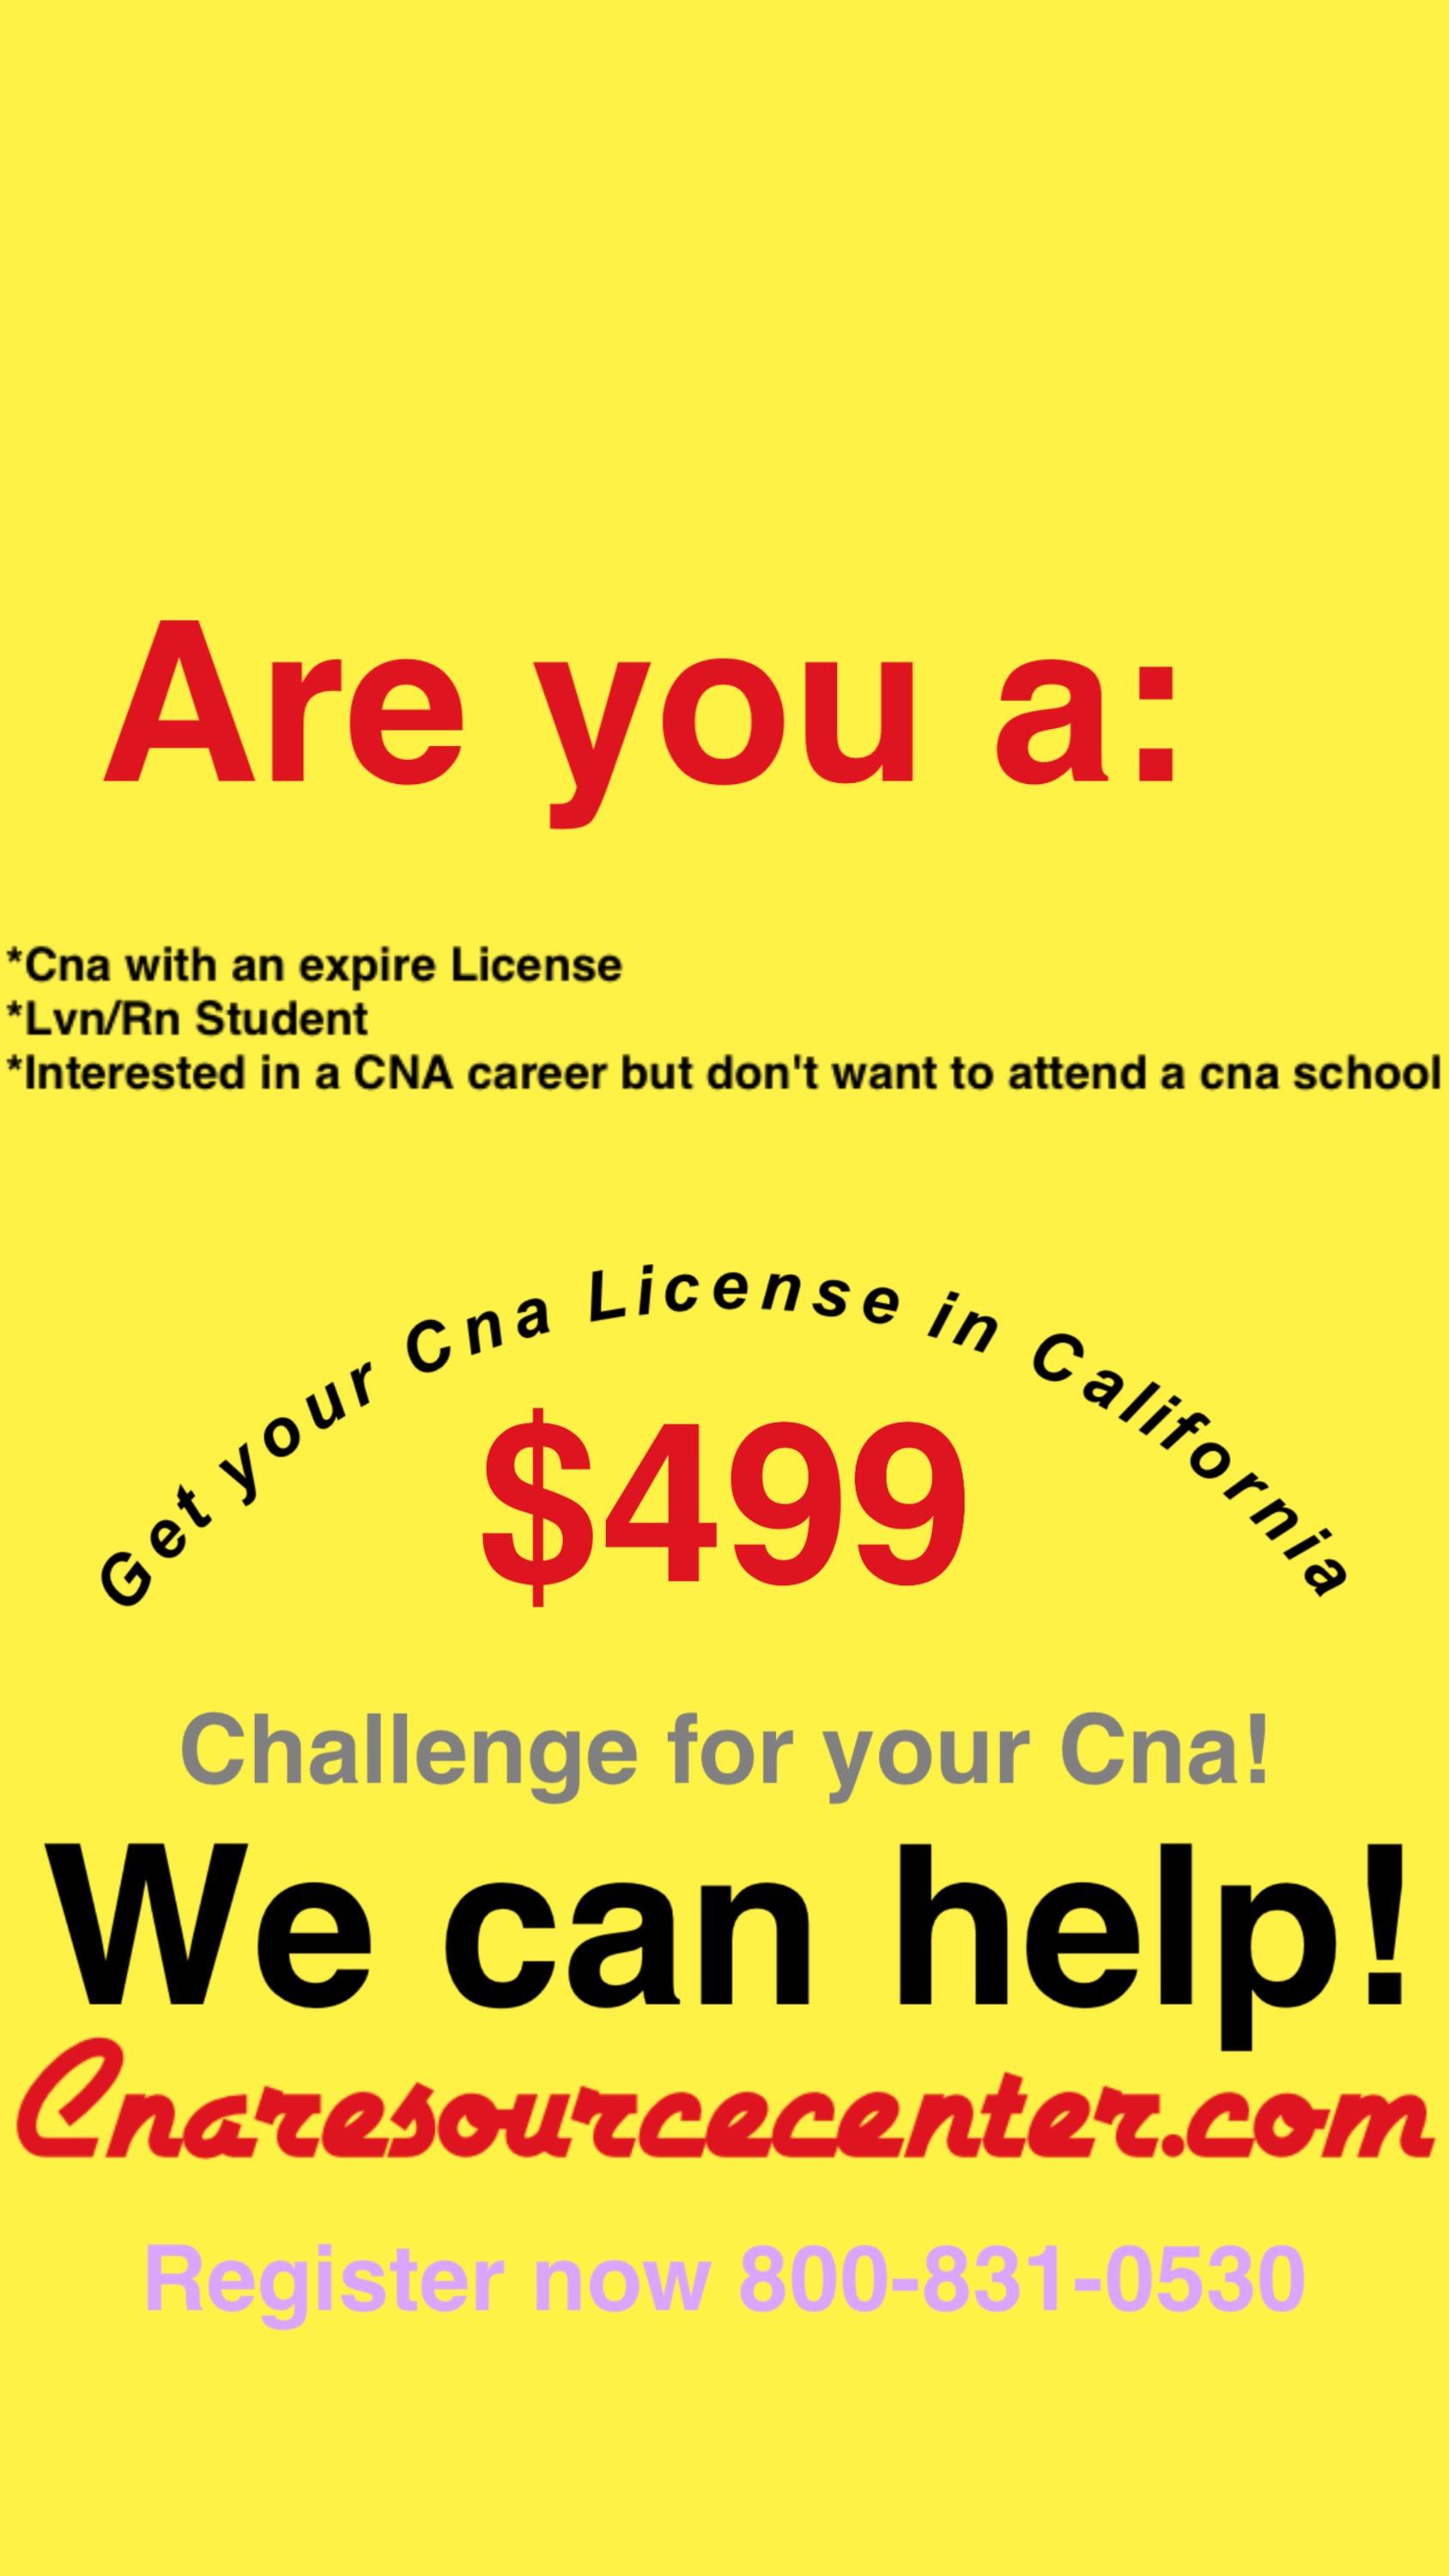 Cna challenge session (Get your CNA certification by challenging the exam)